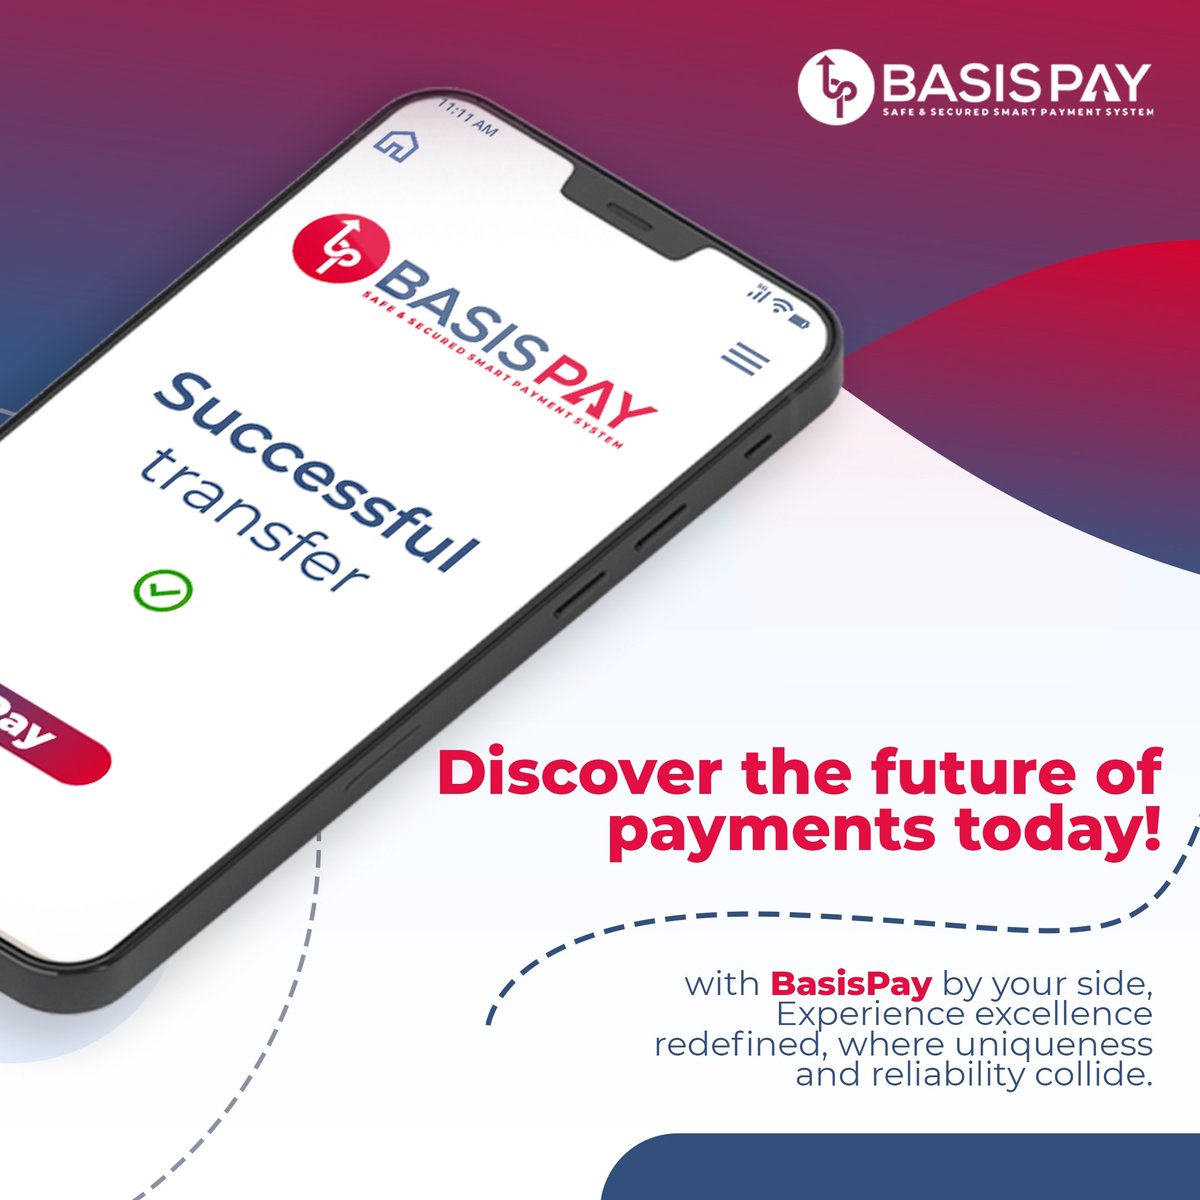 BasisPay payments system

#basispay #upi #pointofsale #contactlesspayments #buy #bank #finance #news #online #mobile #shopping #pos #qrpay #qr #digitalpayment #payments #paymentgateway #india #digitalmoney #debitcard #creditcard #buy #digital #mobilepayment  #world #ai